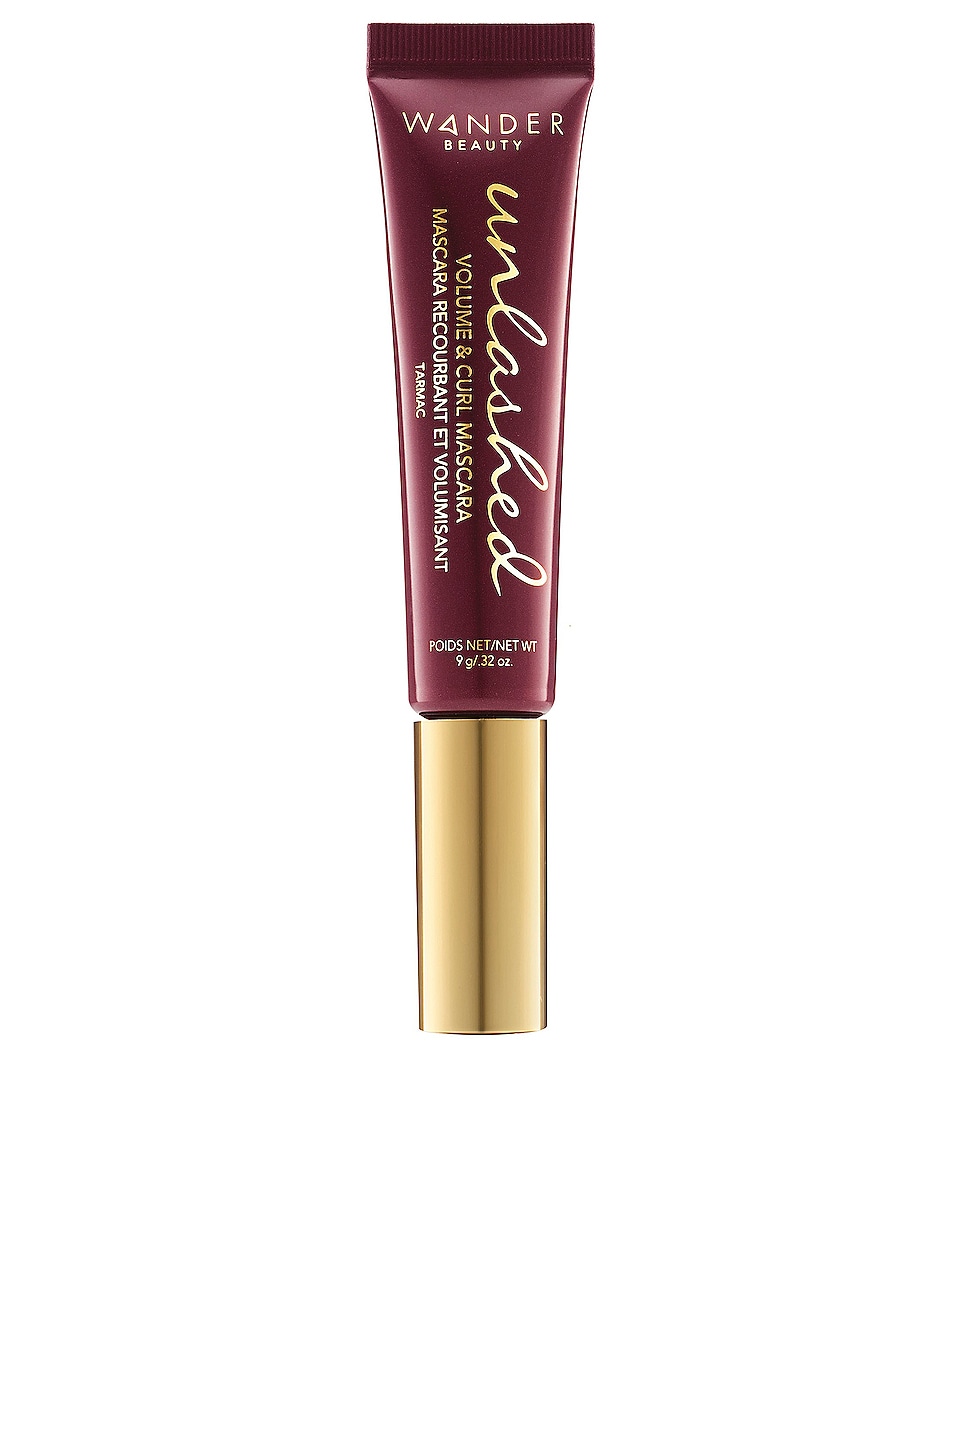 WANDER BEAUTY UNLASHED VOLUME AND CURL MASCARA,WBEA-WU12